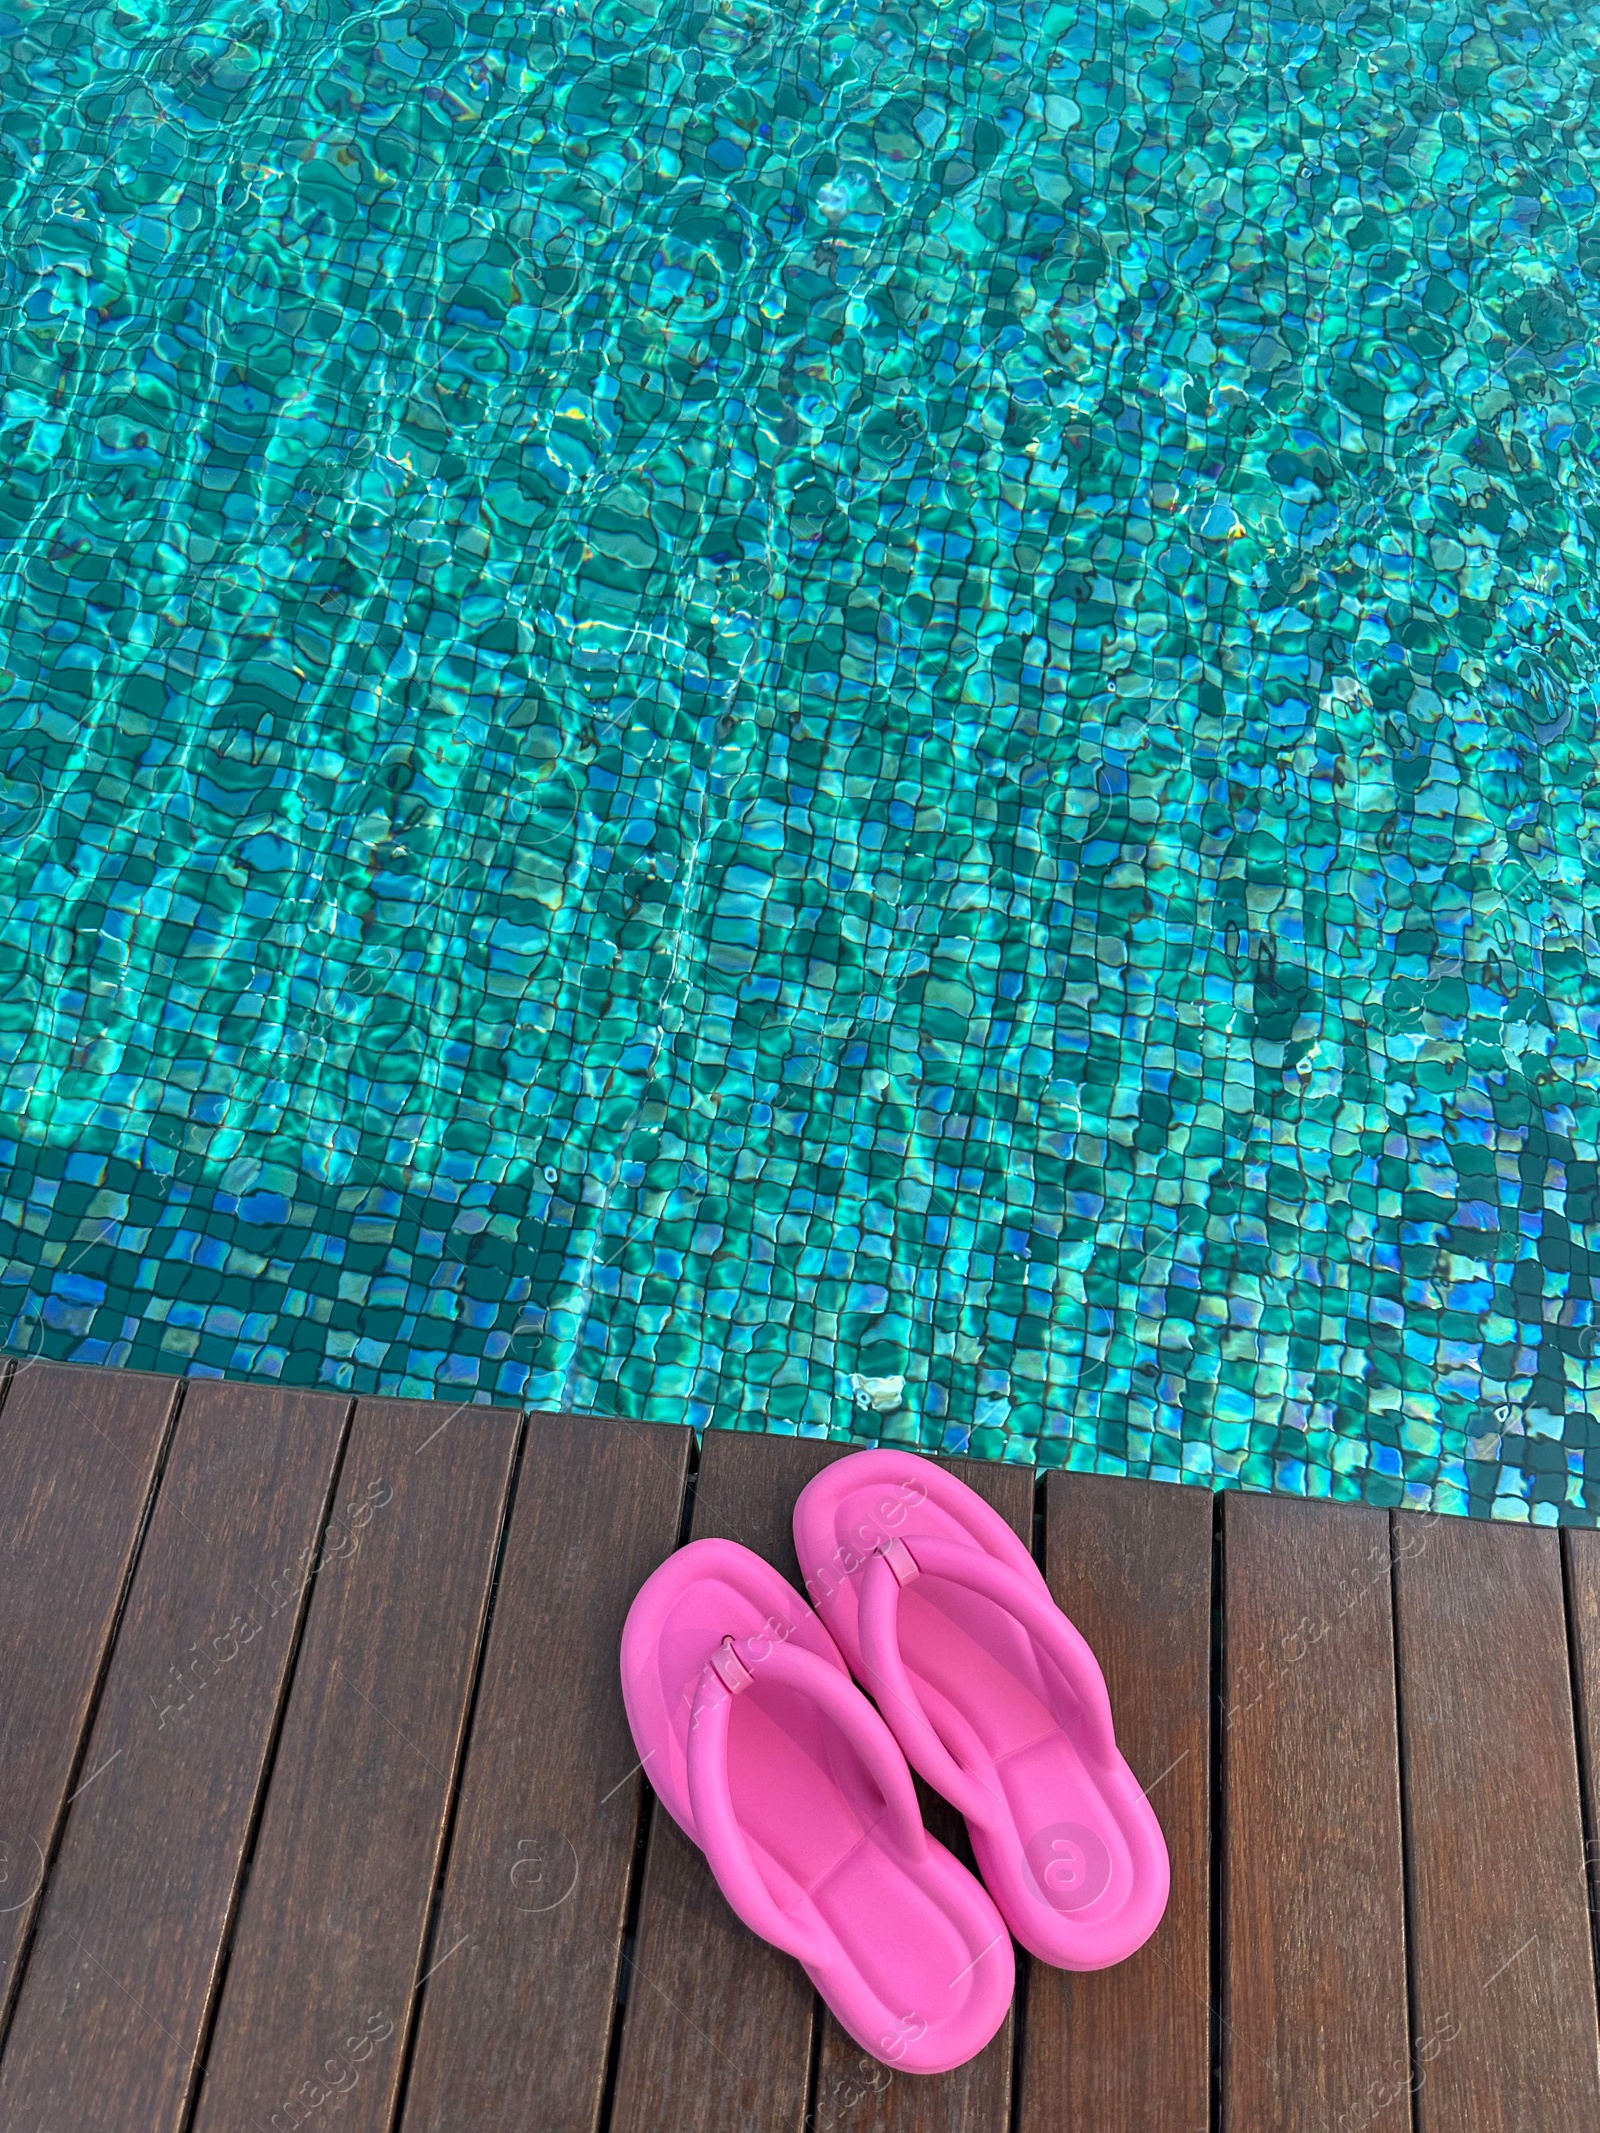 Photo of Clear rippled water in swimming pool and pink flip-flops on wooden deck outdoors, above view. Space for text